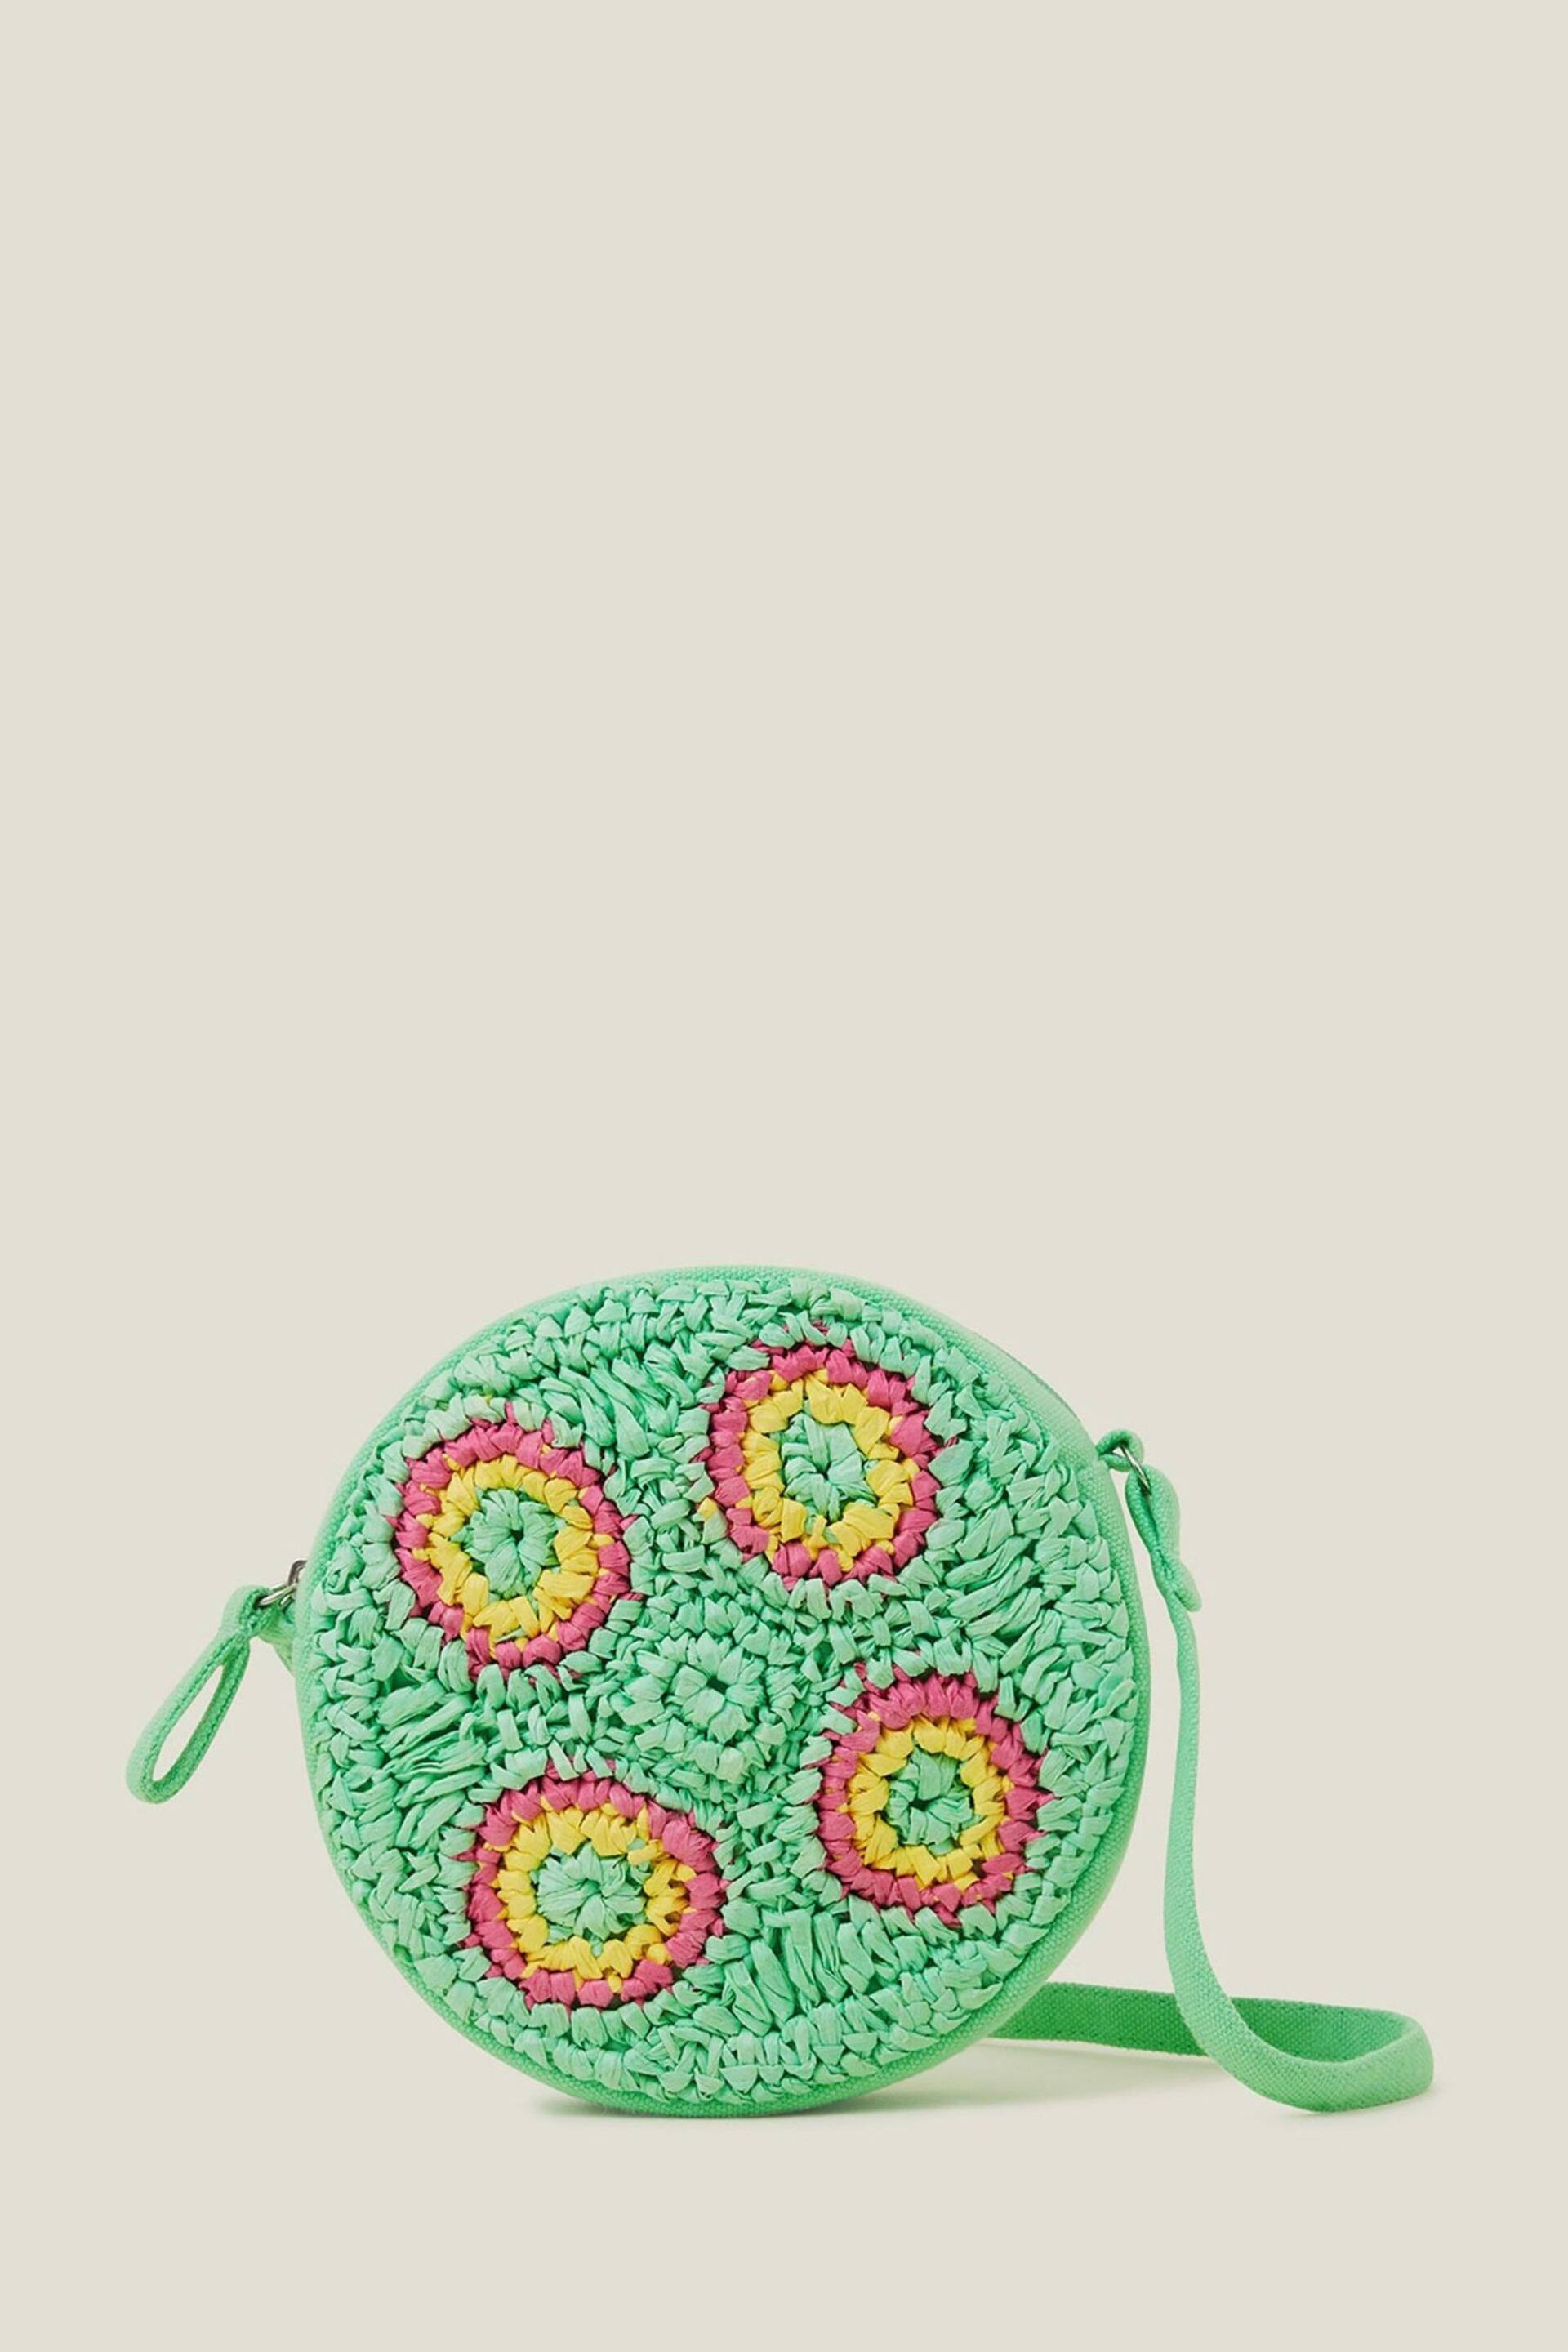 Angels By Accessorize Girls Green Crochet Round Cross-Body Bag - Image 2 of 3